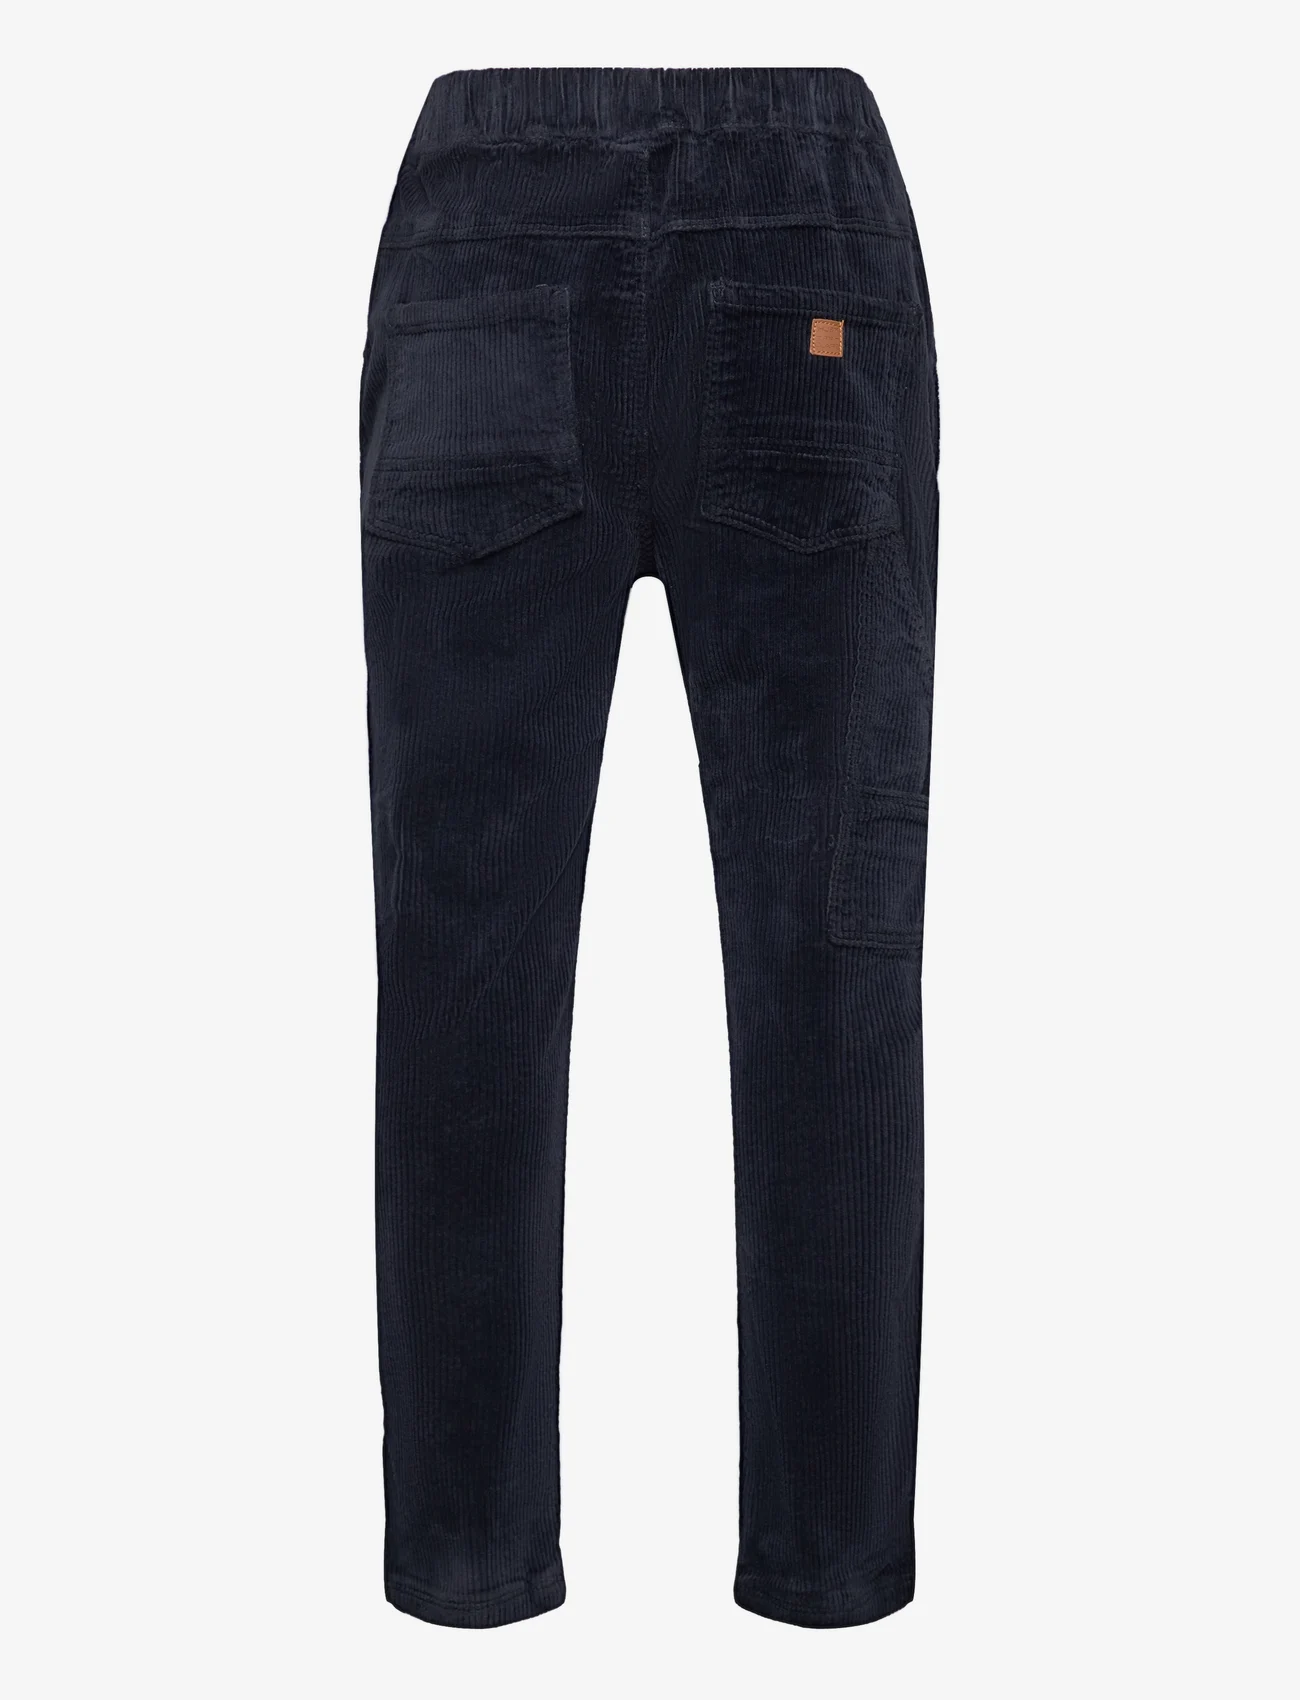 Hust & Claire - Thore - Trousers - lowest prices - blue night - 1